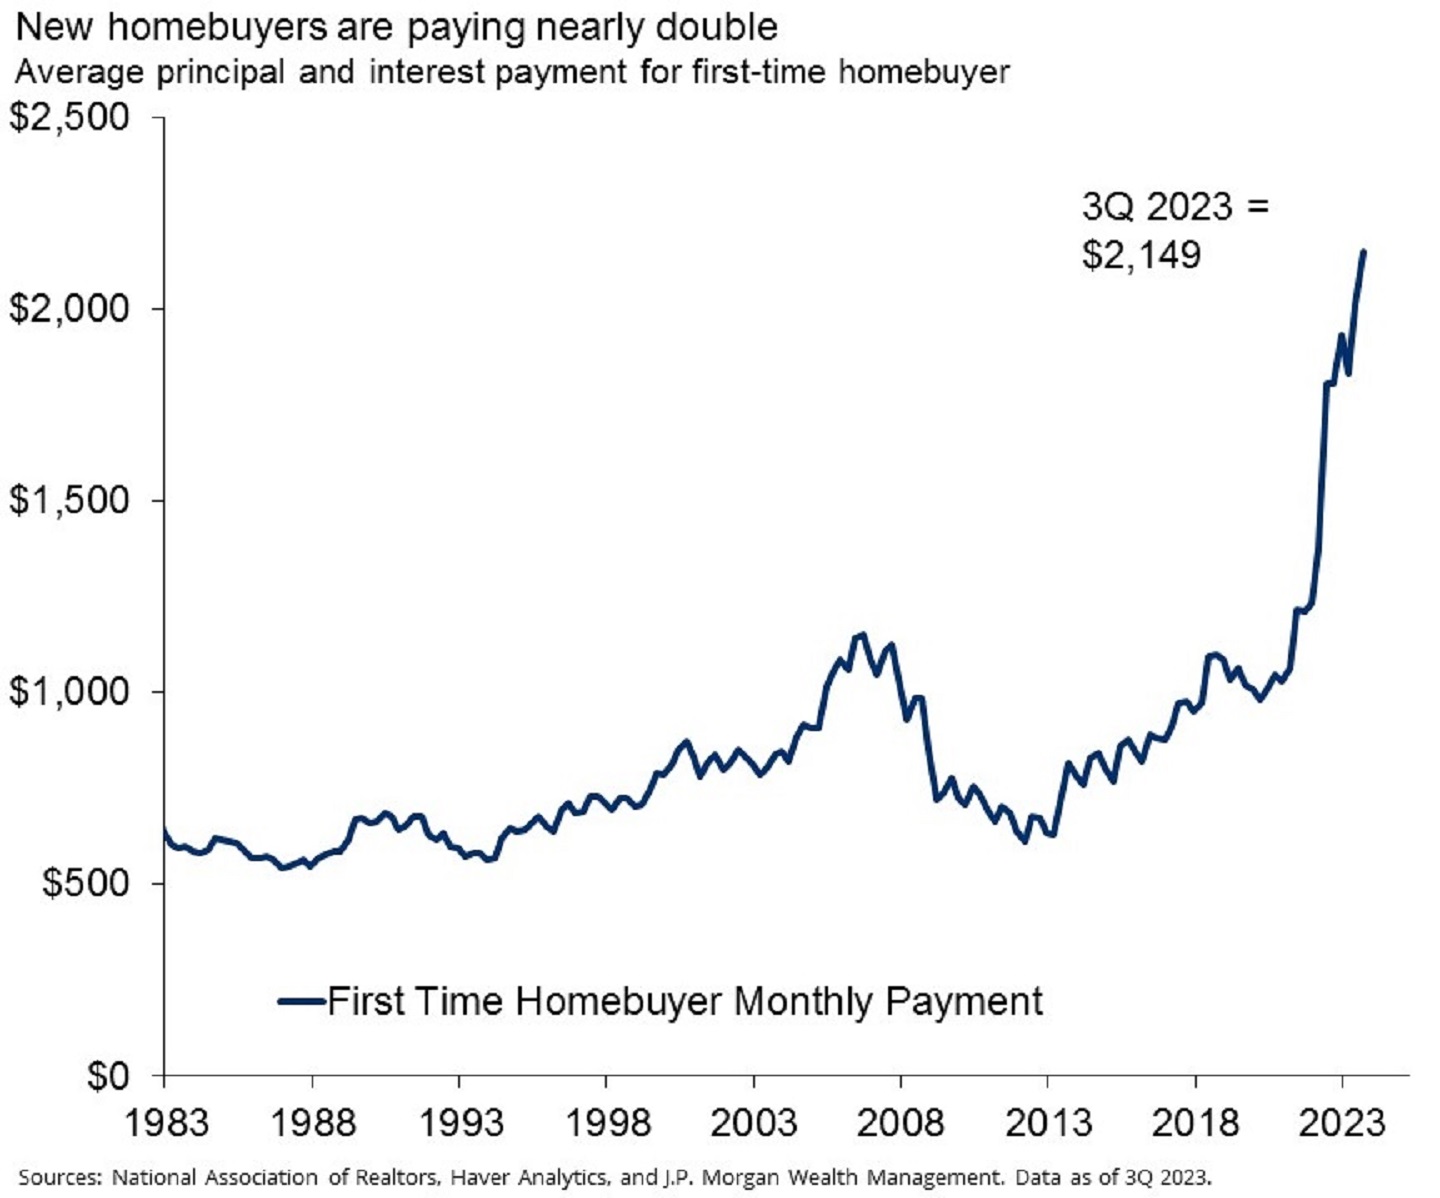 This chart shows the average monthly payment of a first time homebuyer from 1983 to 3Q 2023.